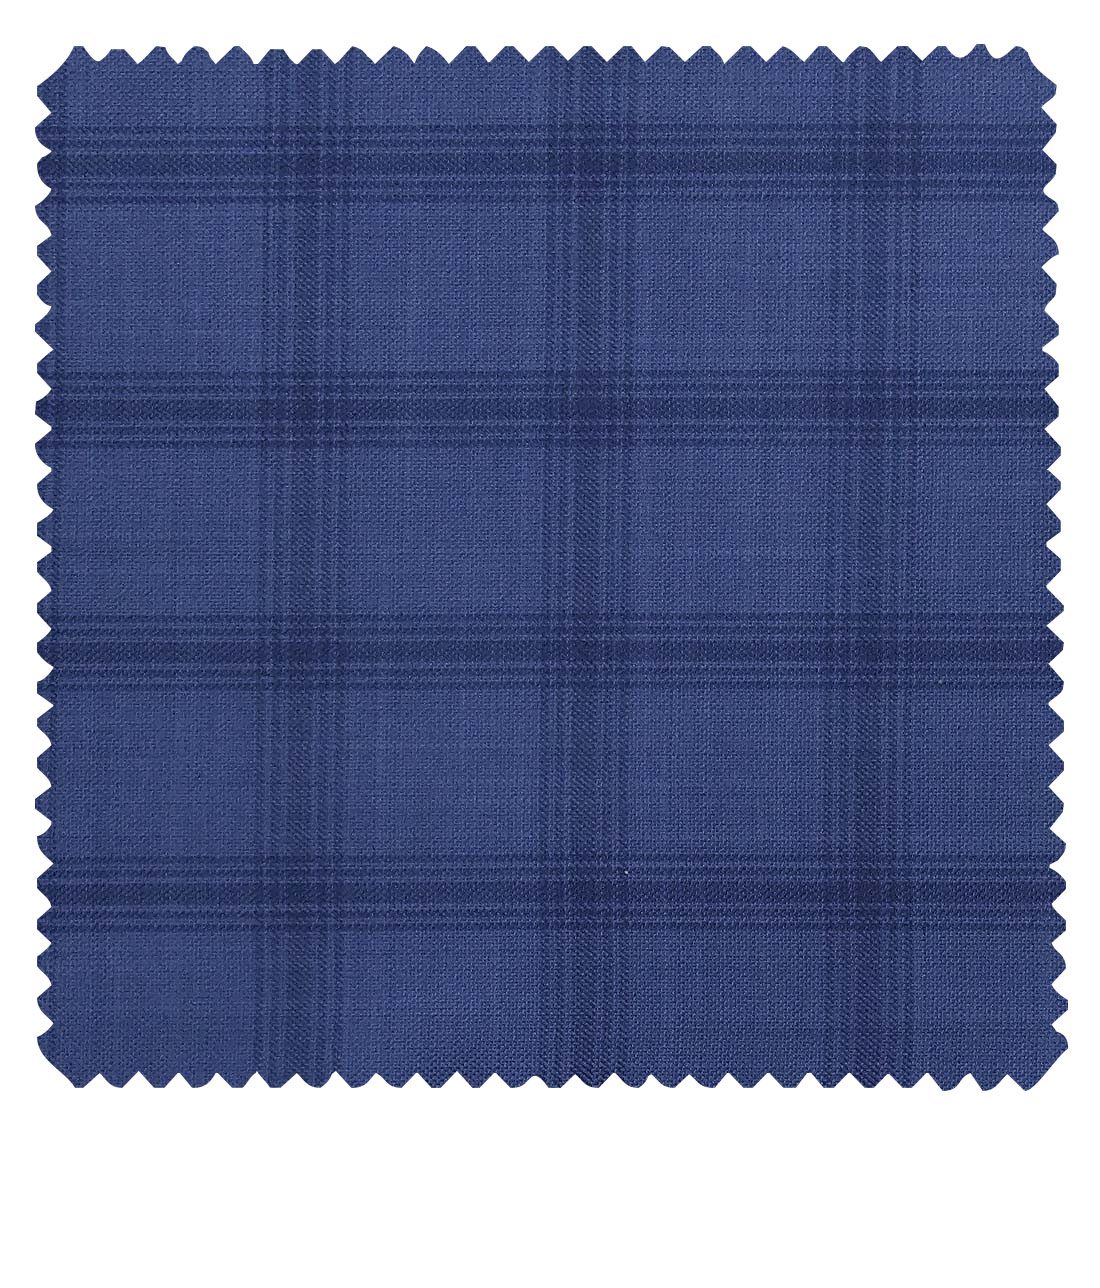 Marconi by Siyaram's Light BlueTerry Rayon Blue Broad Checks Unstitched Suiting Fabric